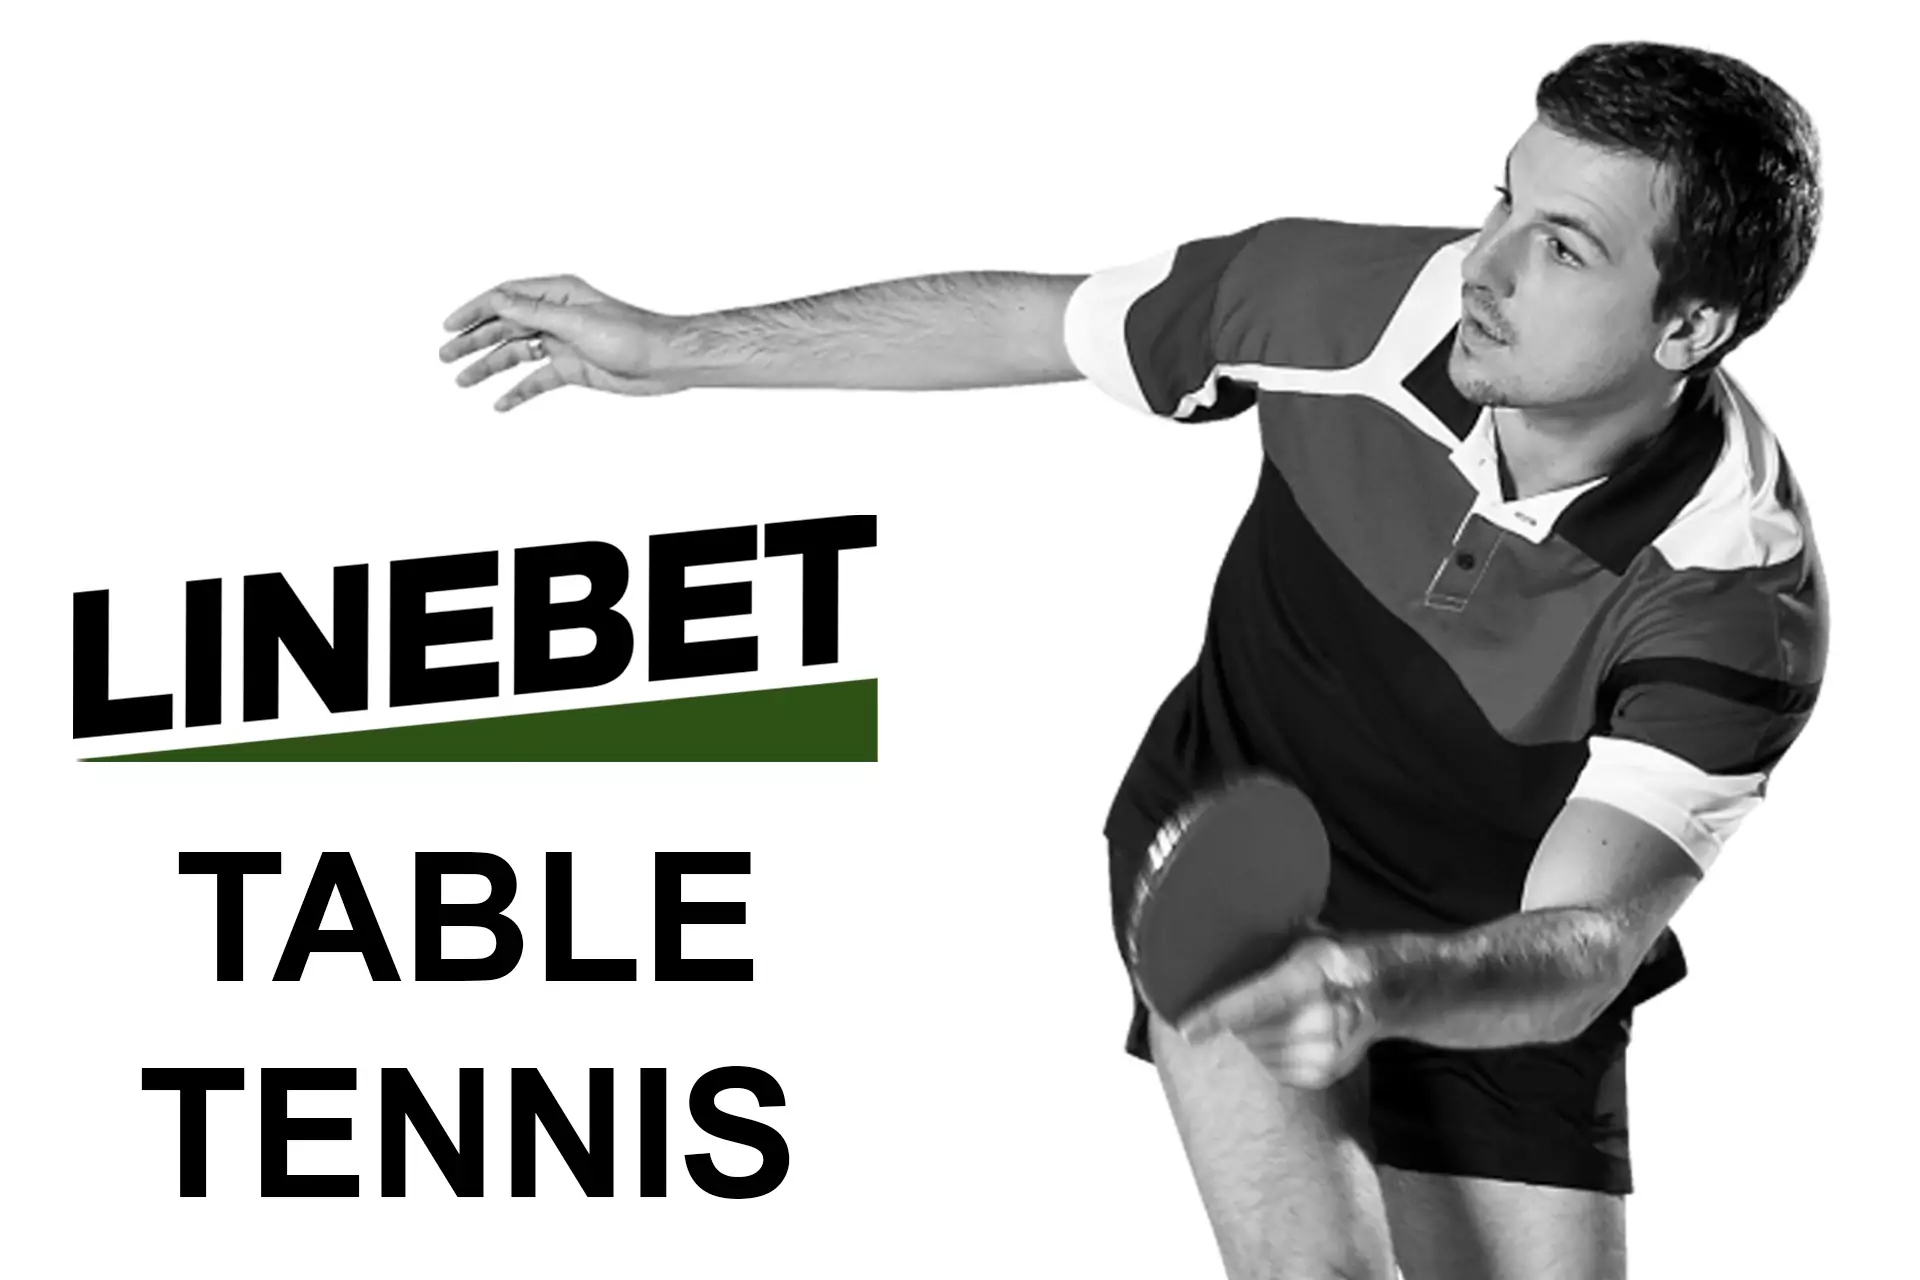 You can also bet on table tennis events.